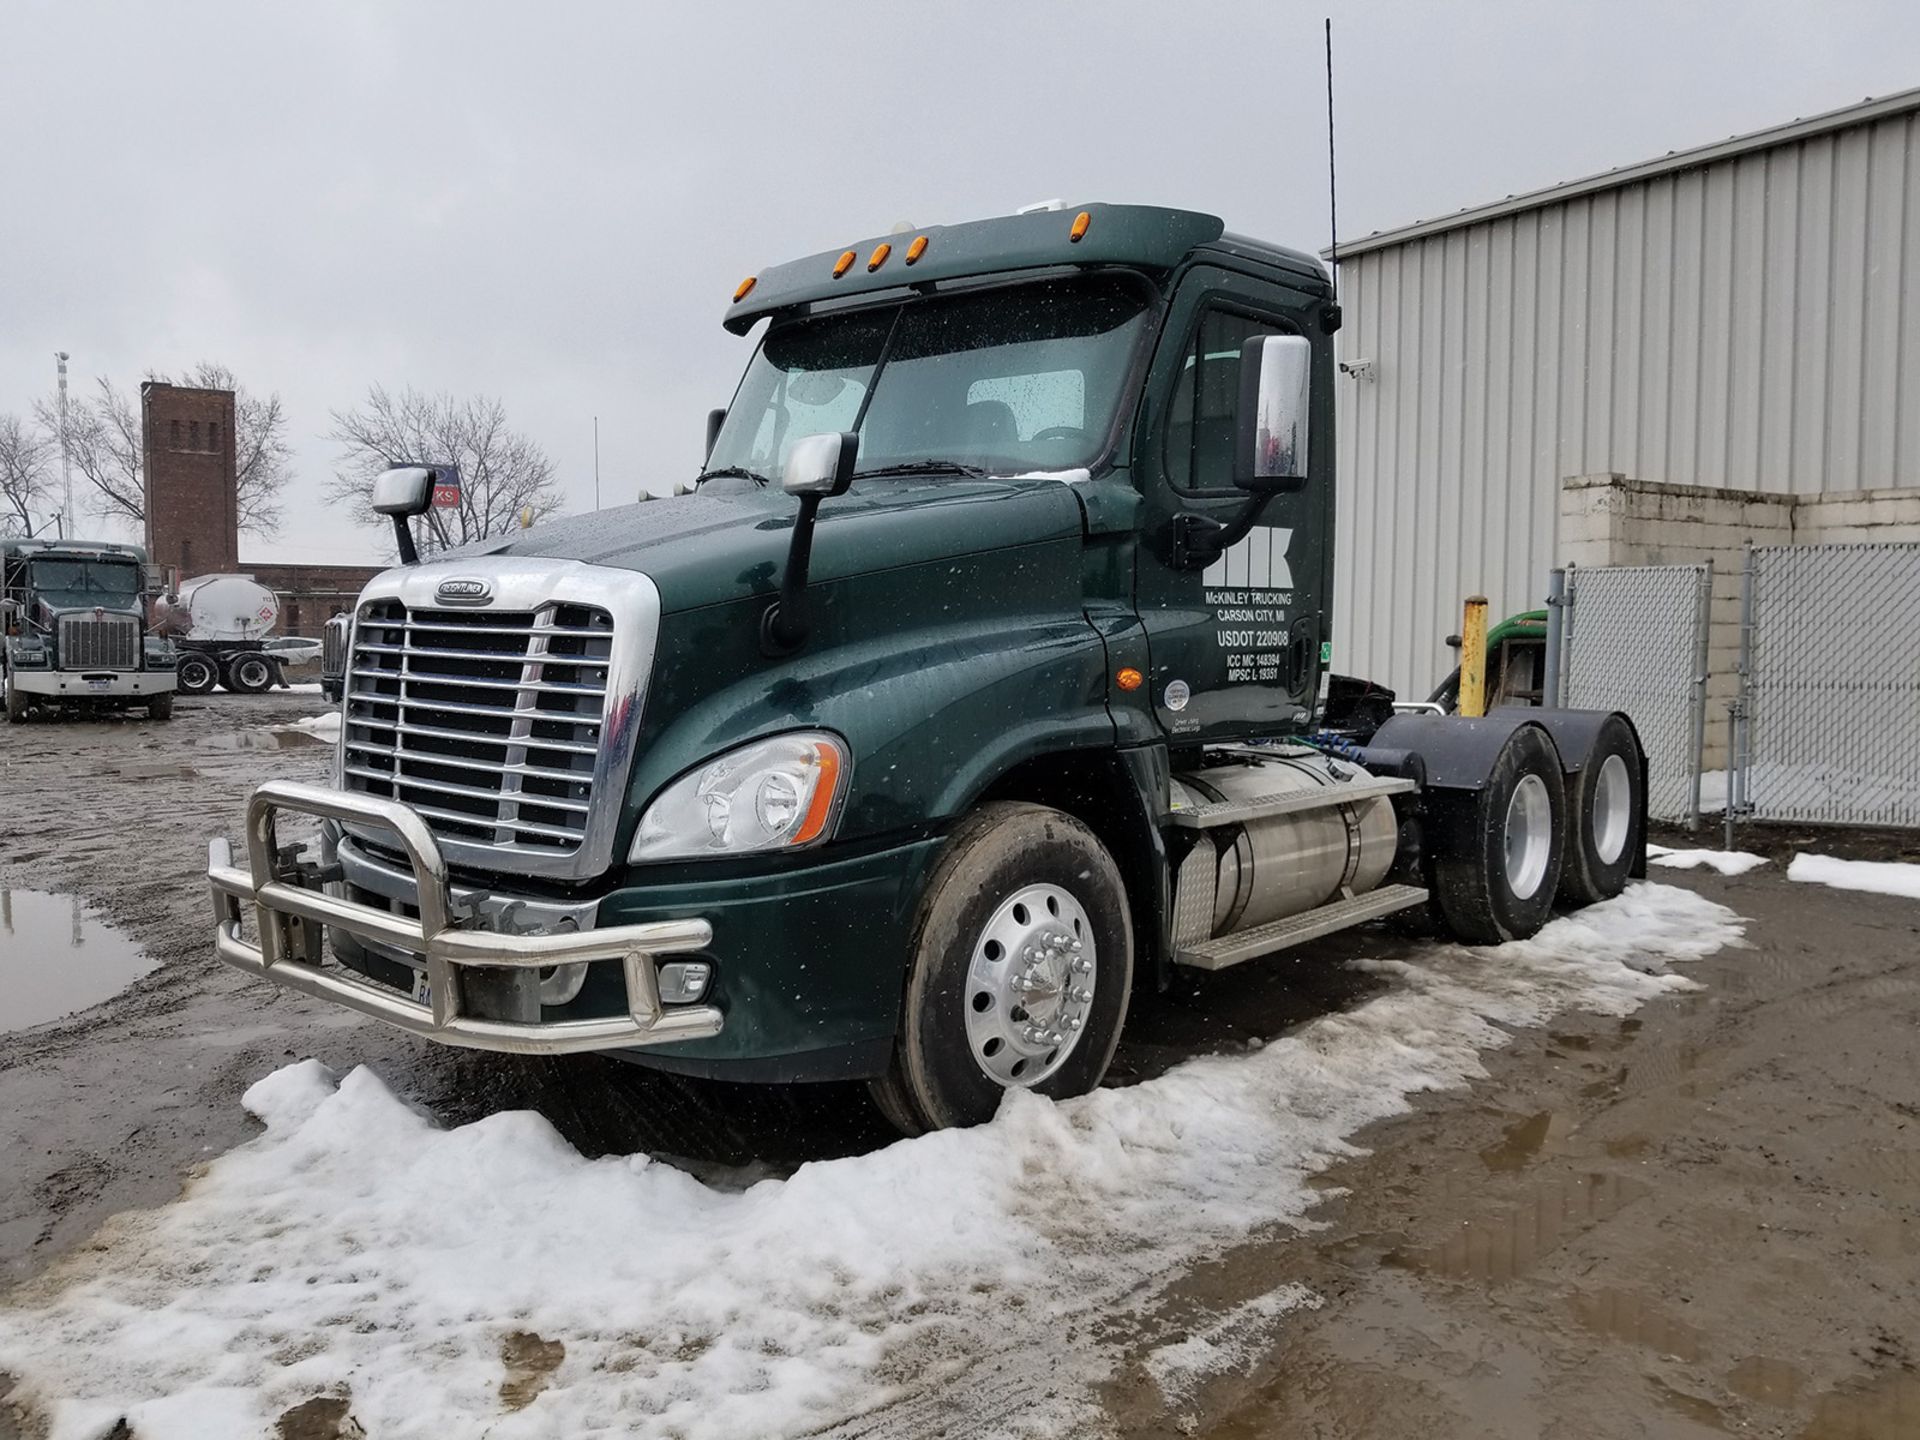 2015 FREIGHTLINER CASCADIA T/A TRUCK TRACTOR, DAY CAB, VIN 3AKJGED5XFSGM1604, 226,053 MILES, EATON